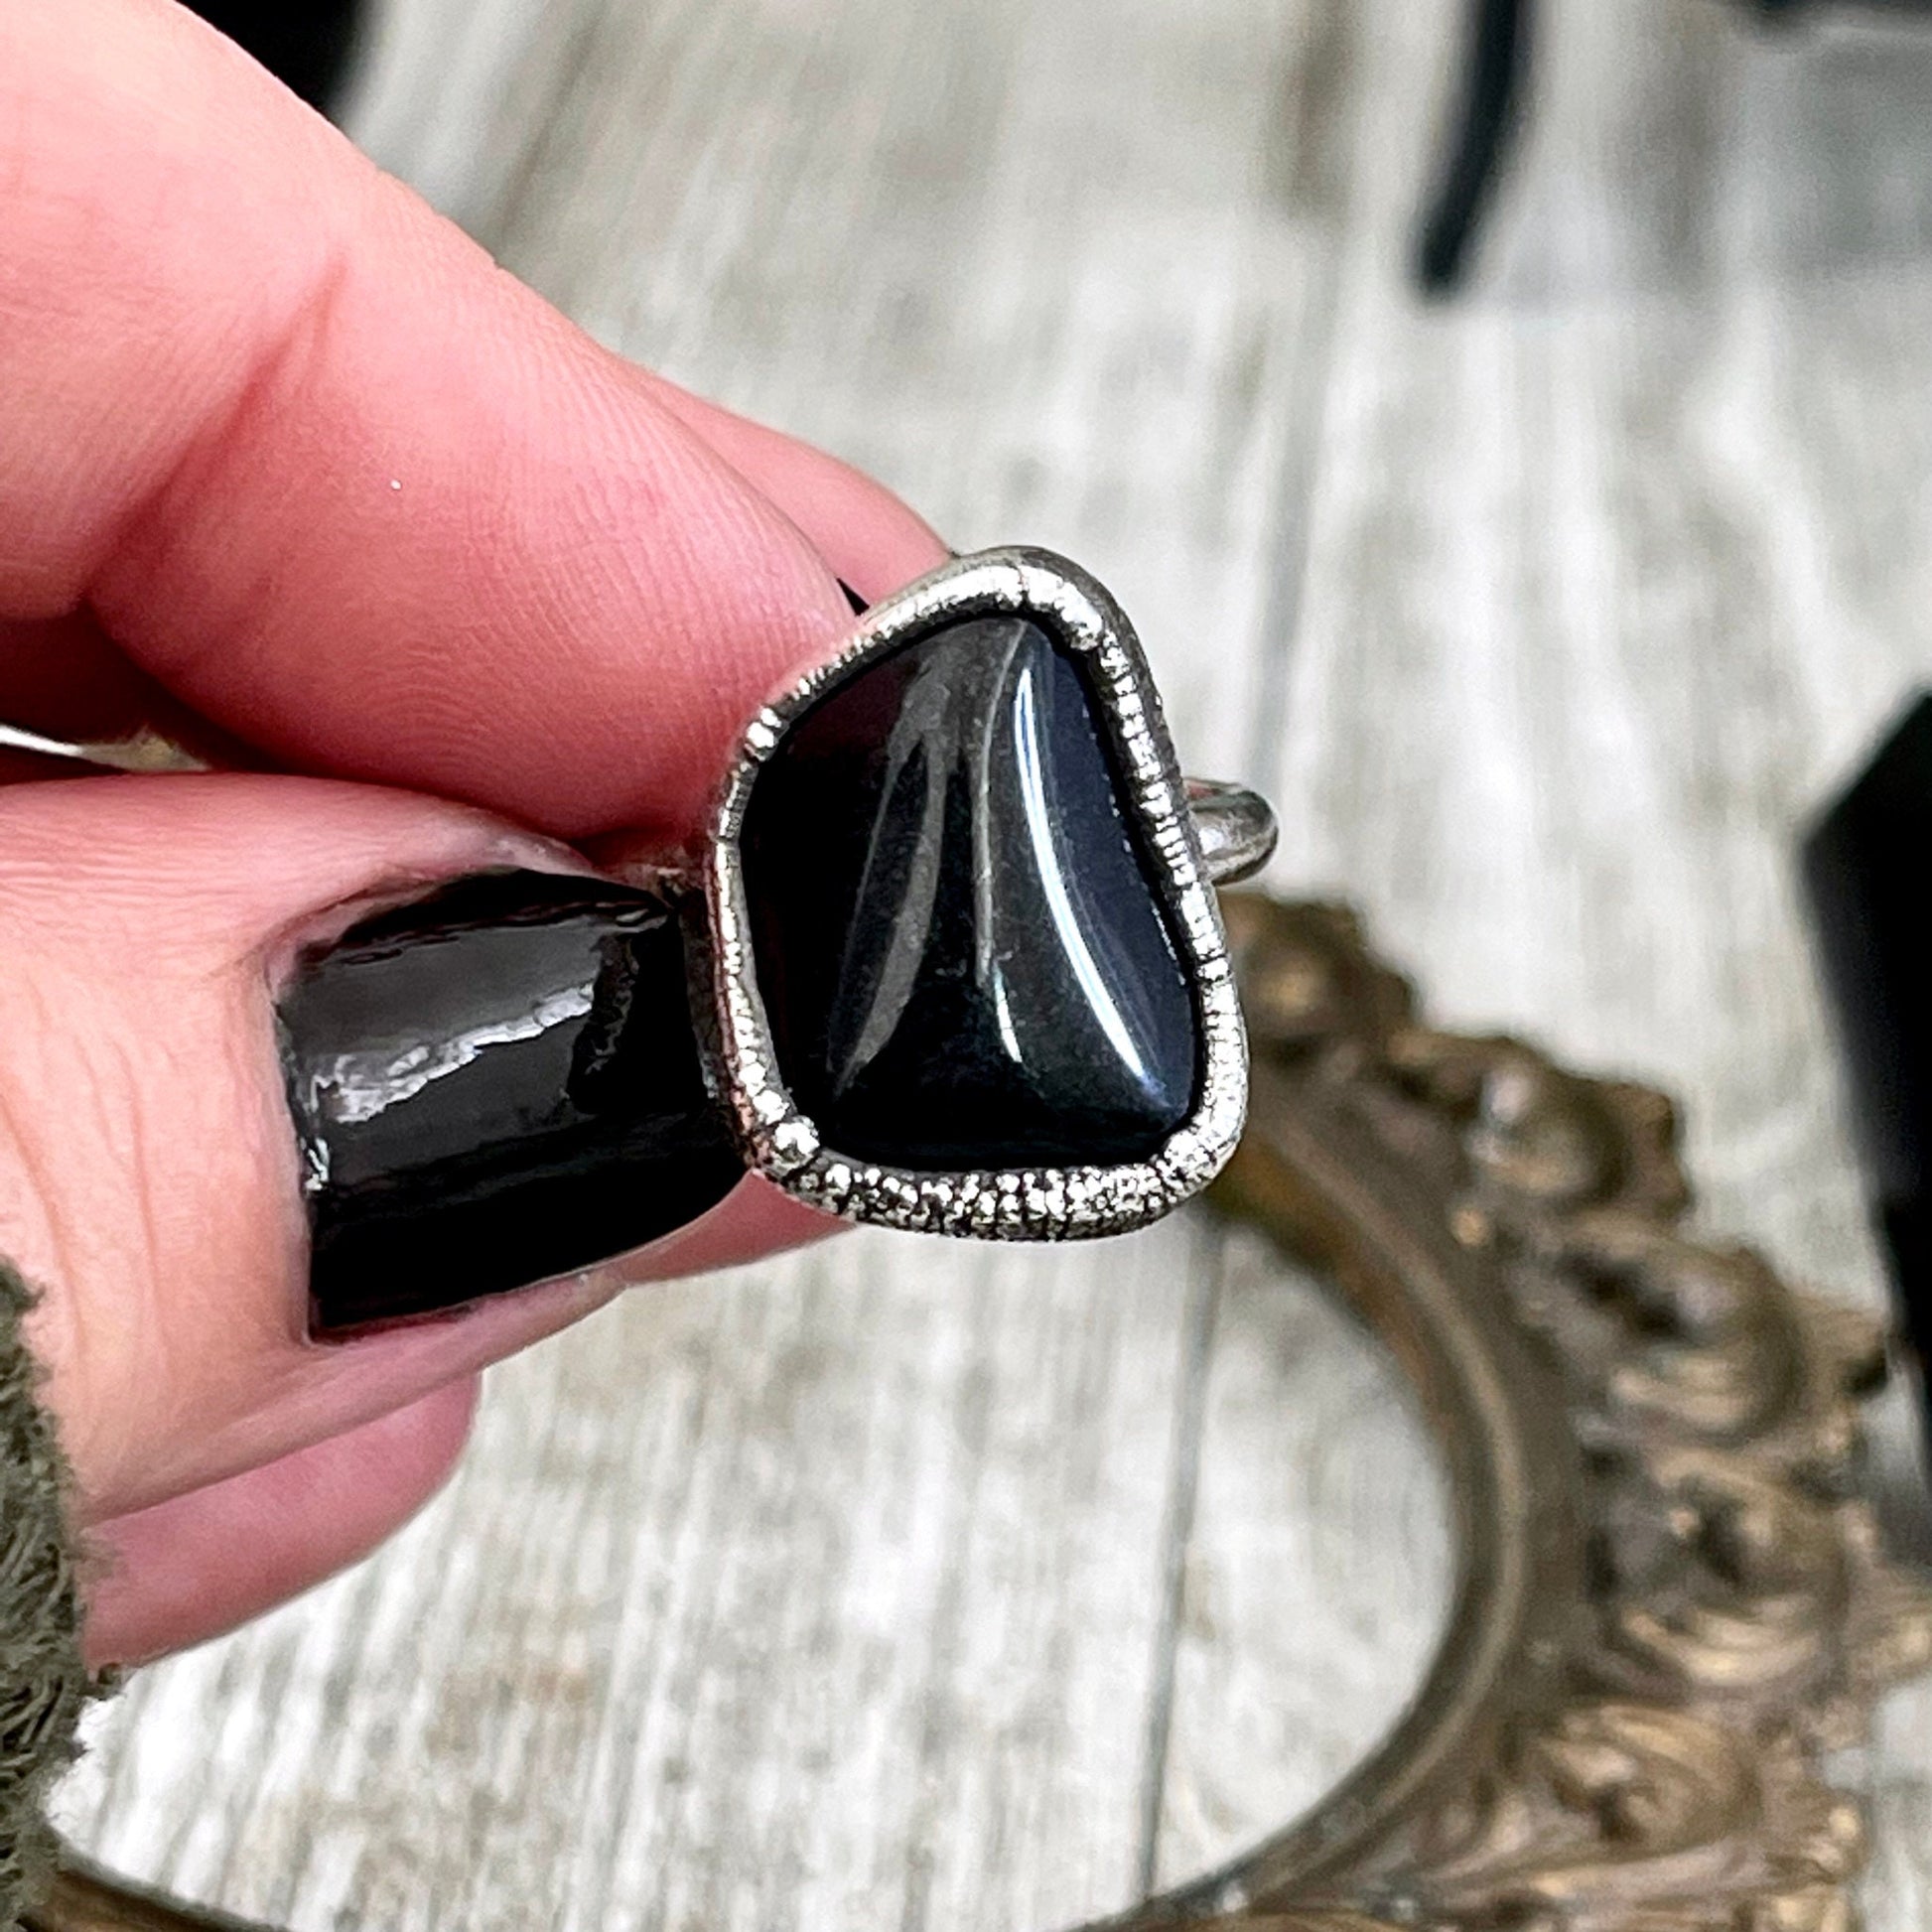 Natural Black Onyx Small Stone Ring in Fine Silver Size 5 6 7 8 9 10 / Foxlark Collection - Foxlark Crystal Jewelry